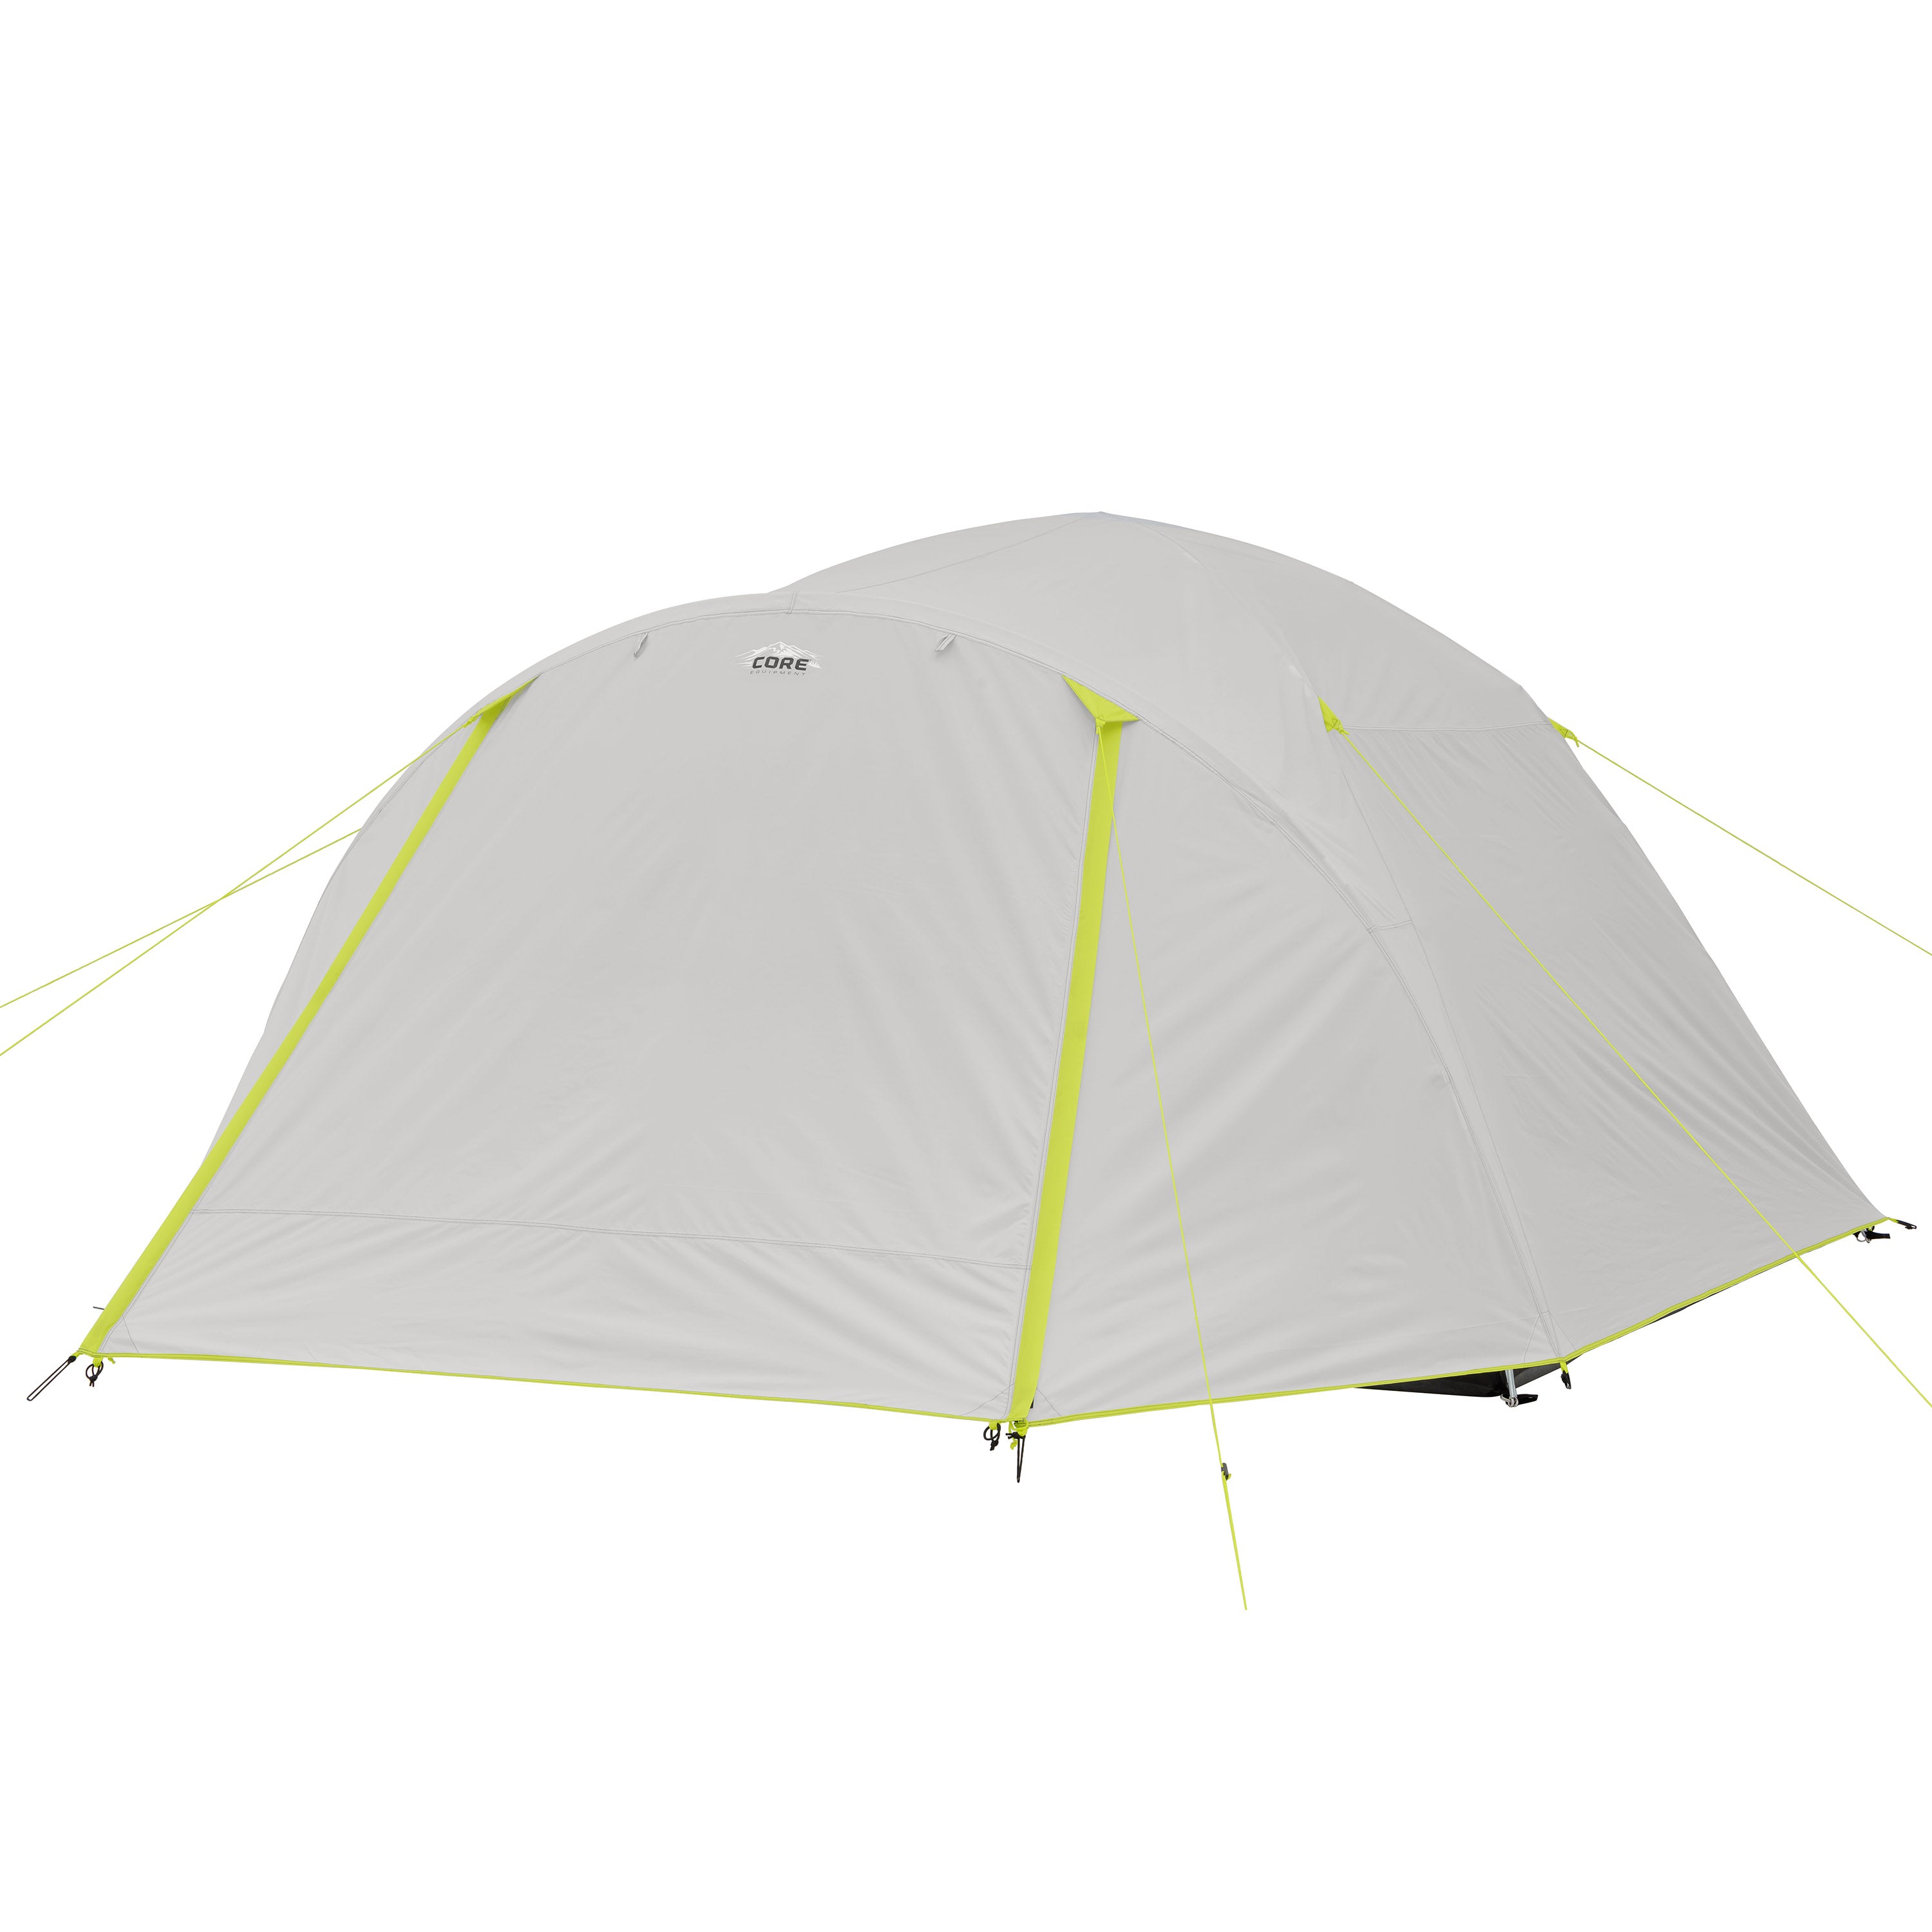 bioscoop Somber vernieuwen 6 Person Lighted Dome Tent with Full Rainfly – Core Equipment